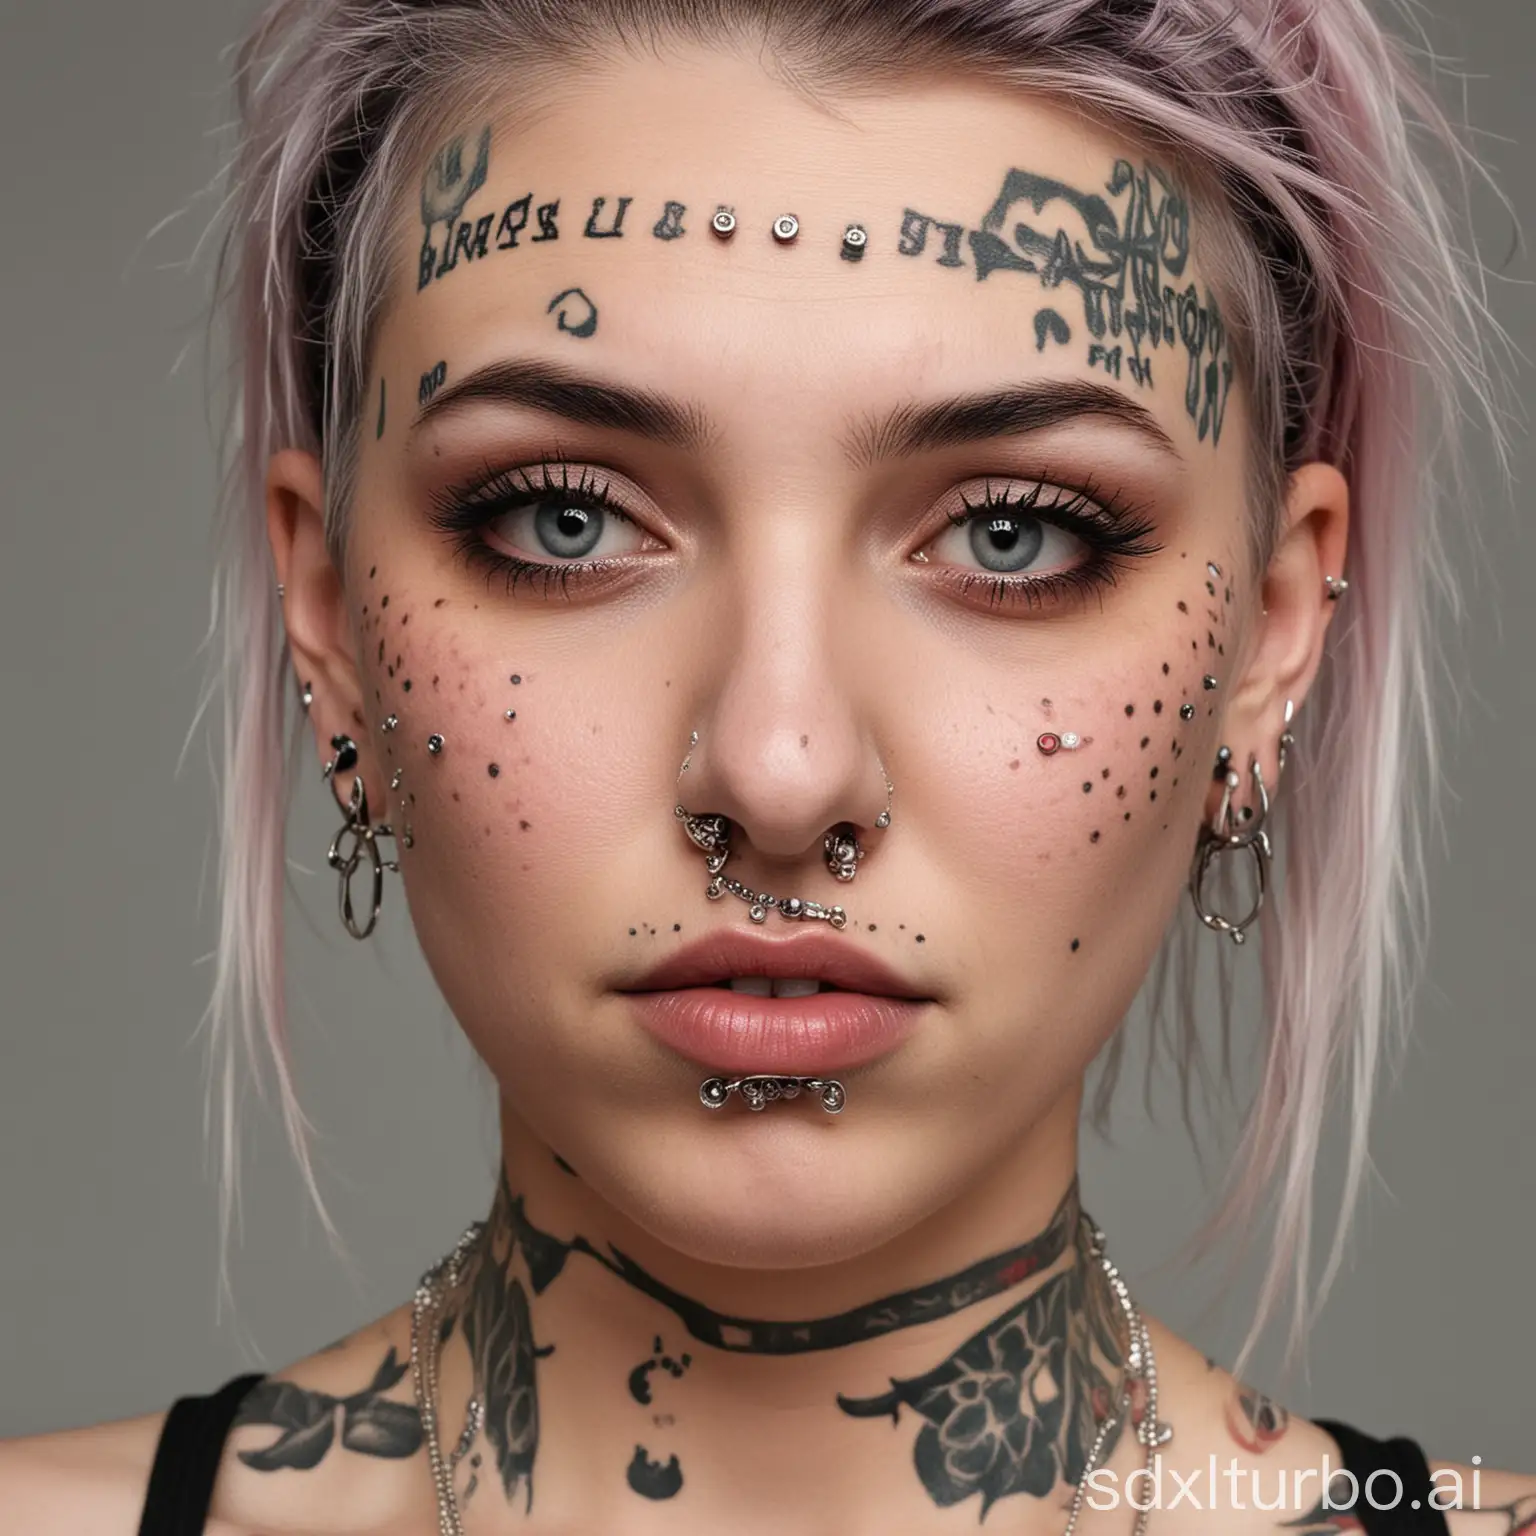 a woman with much too many piercings in his face